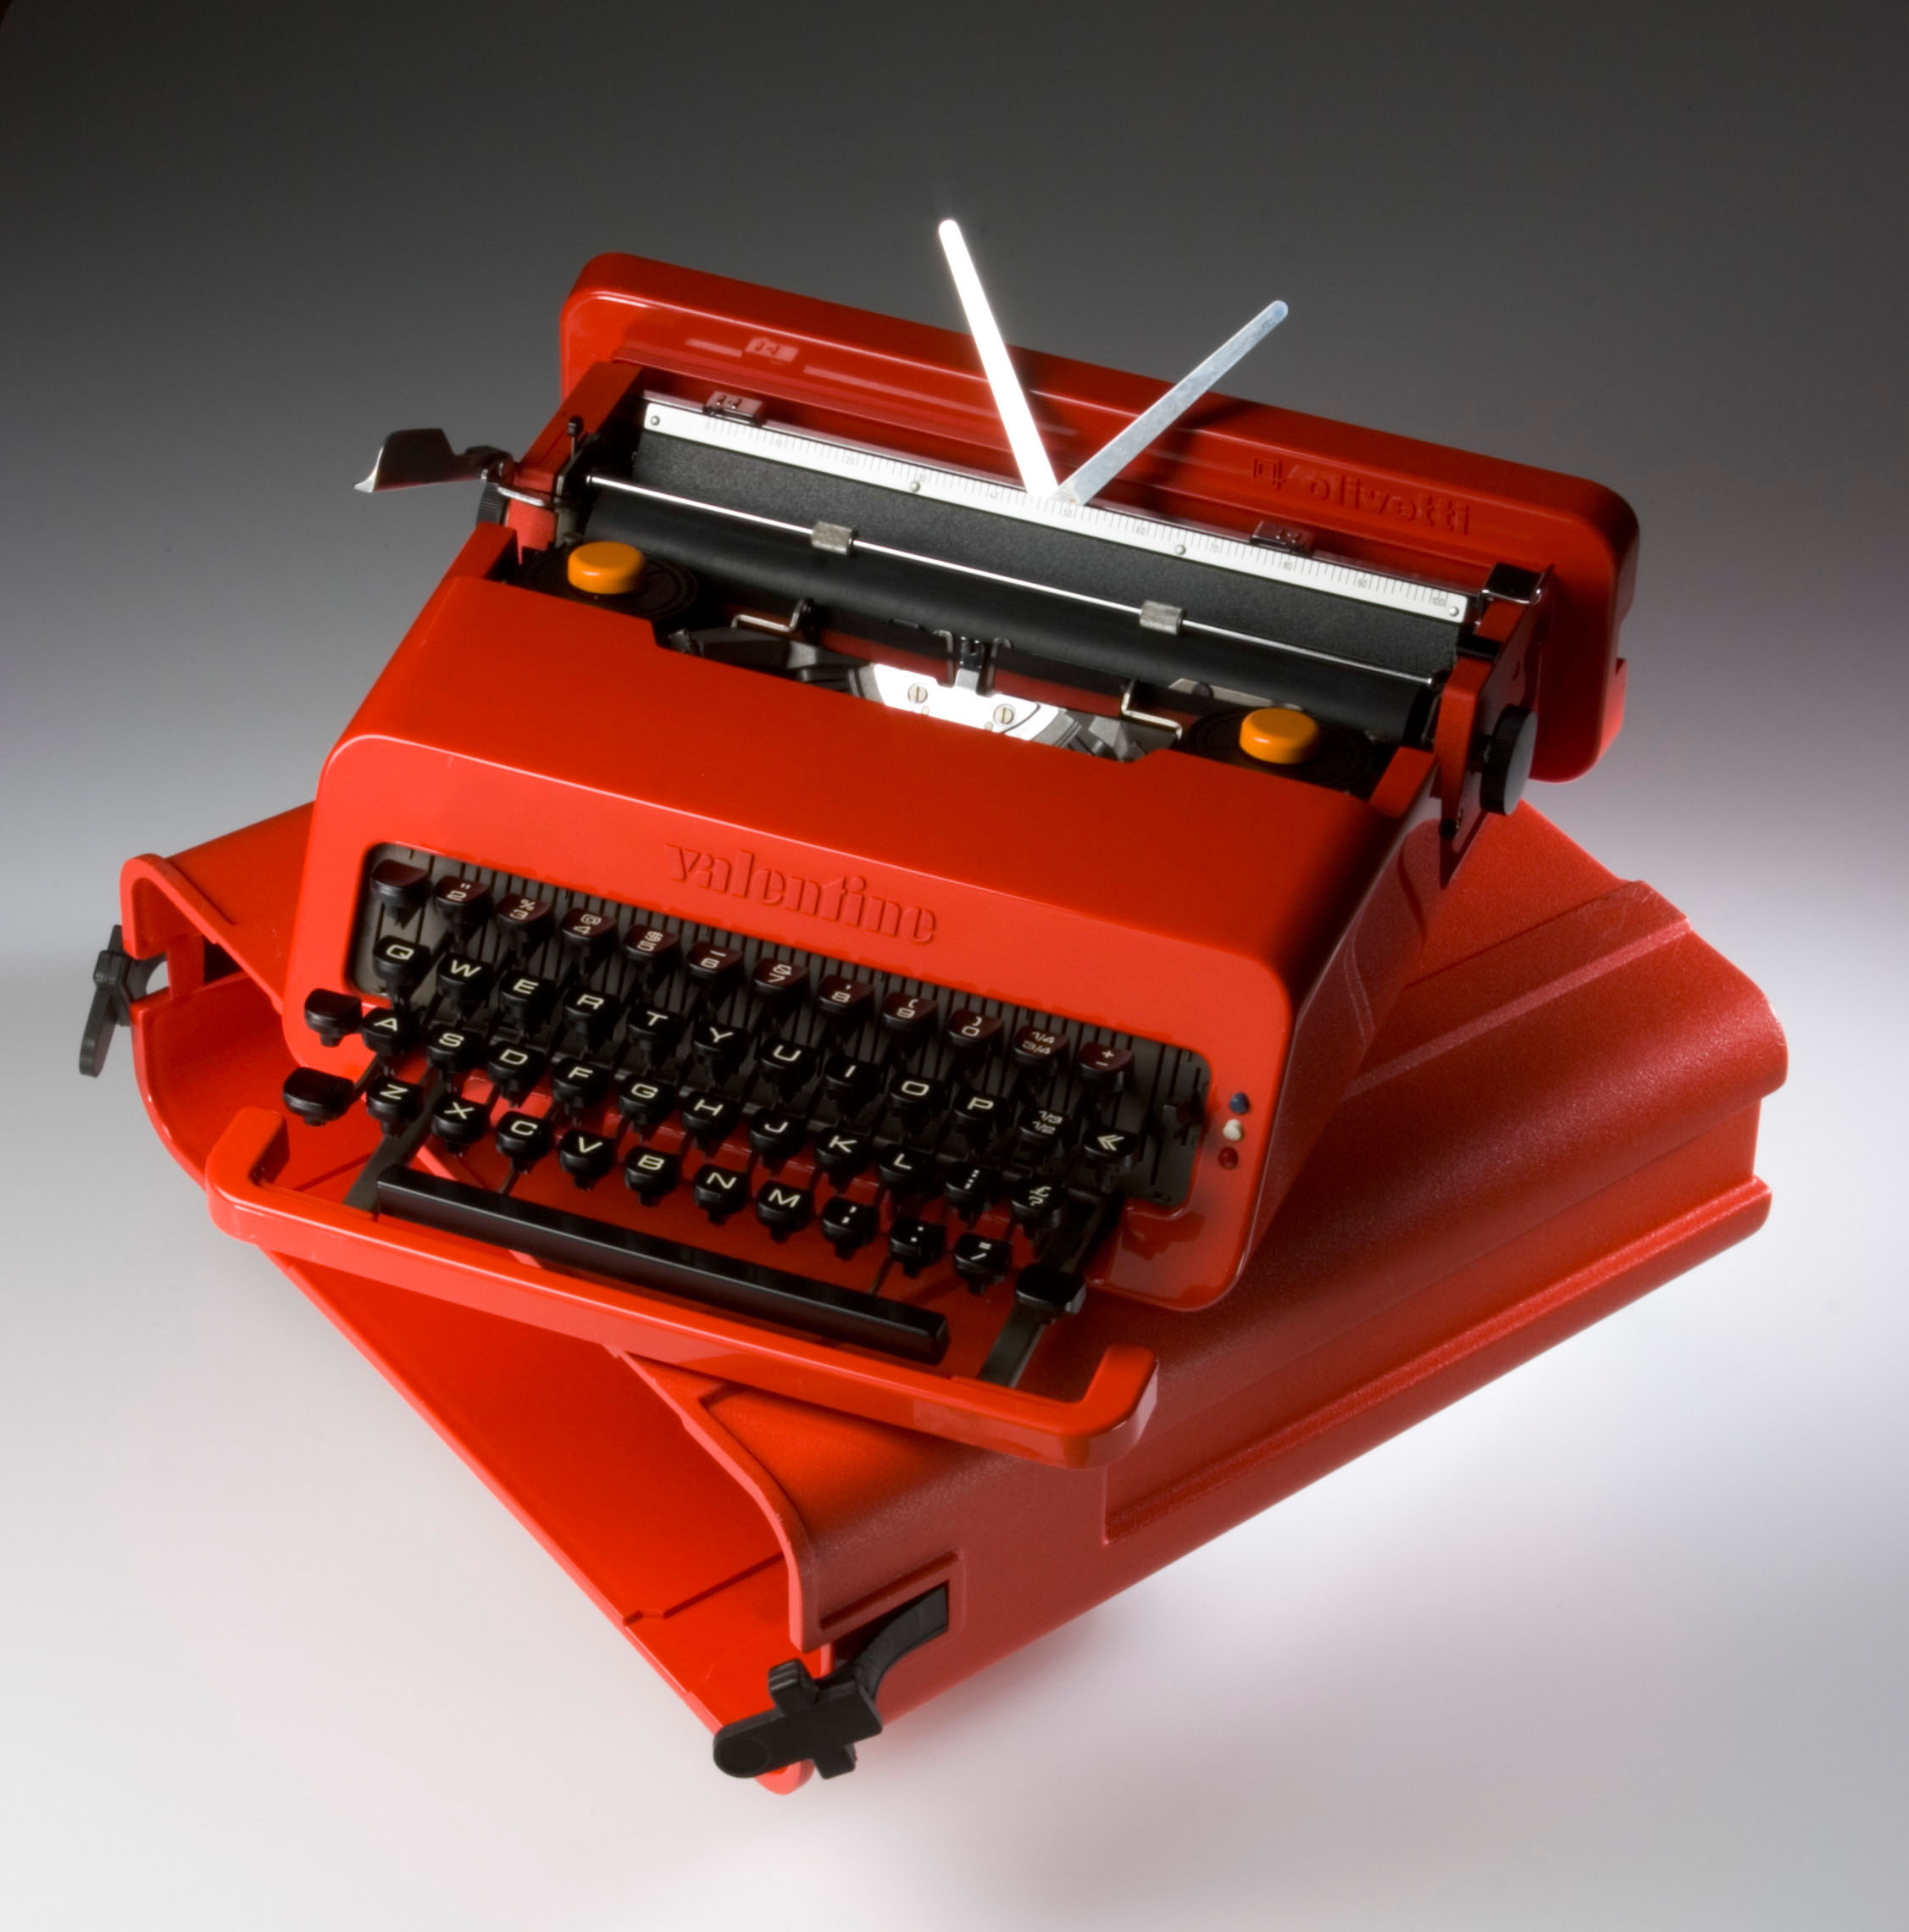 Valentine portable typewriter by Ettore Sottsass and Emily A King, 1969 for Olivetti. Courtesy of the Cantor Arts Center